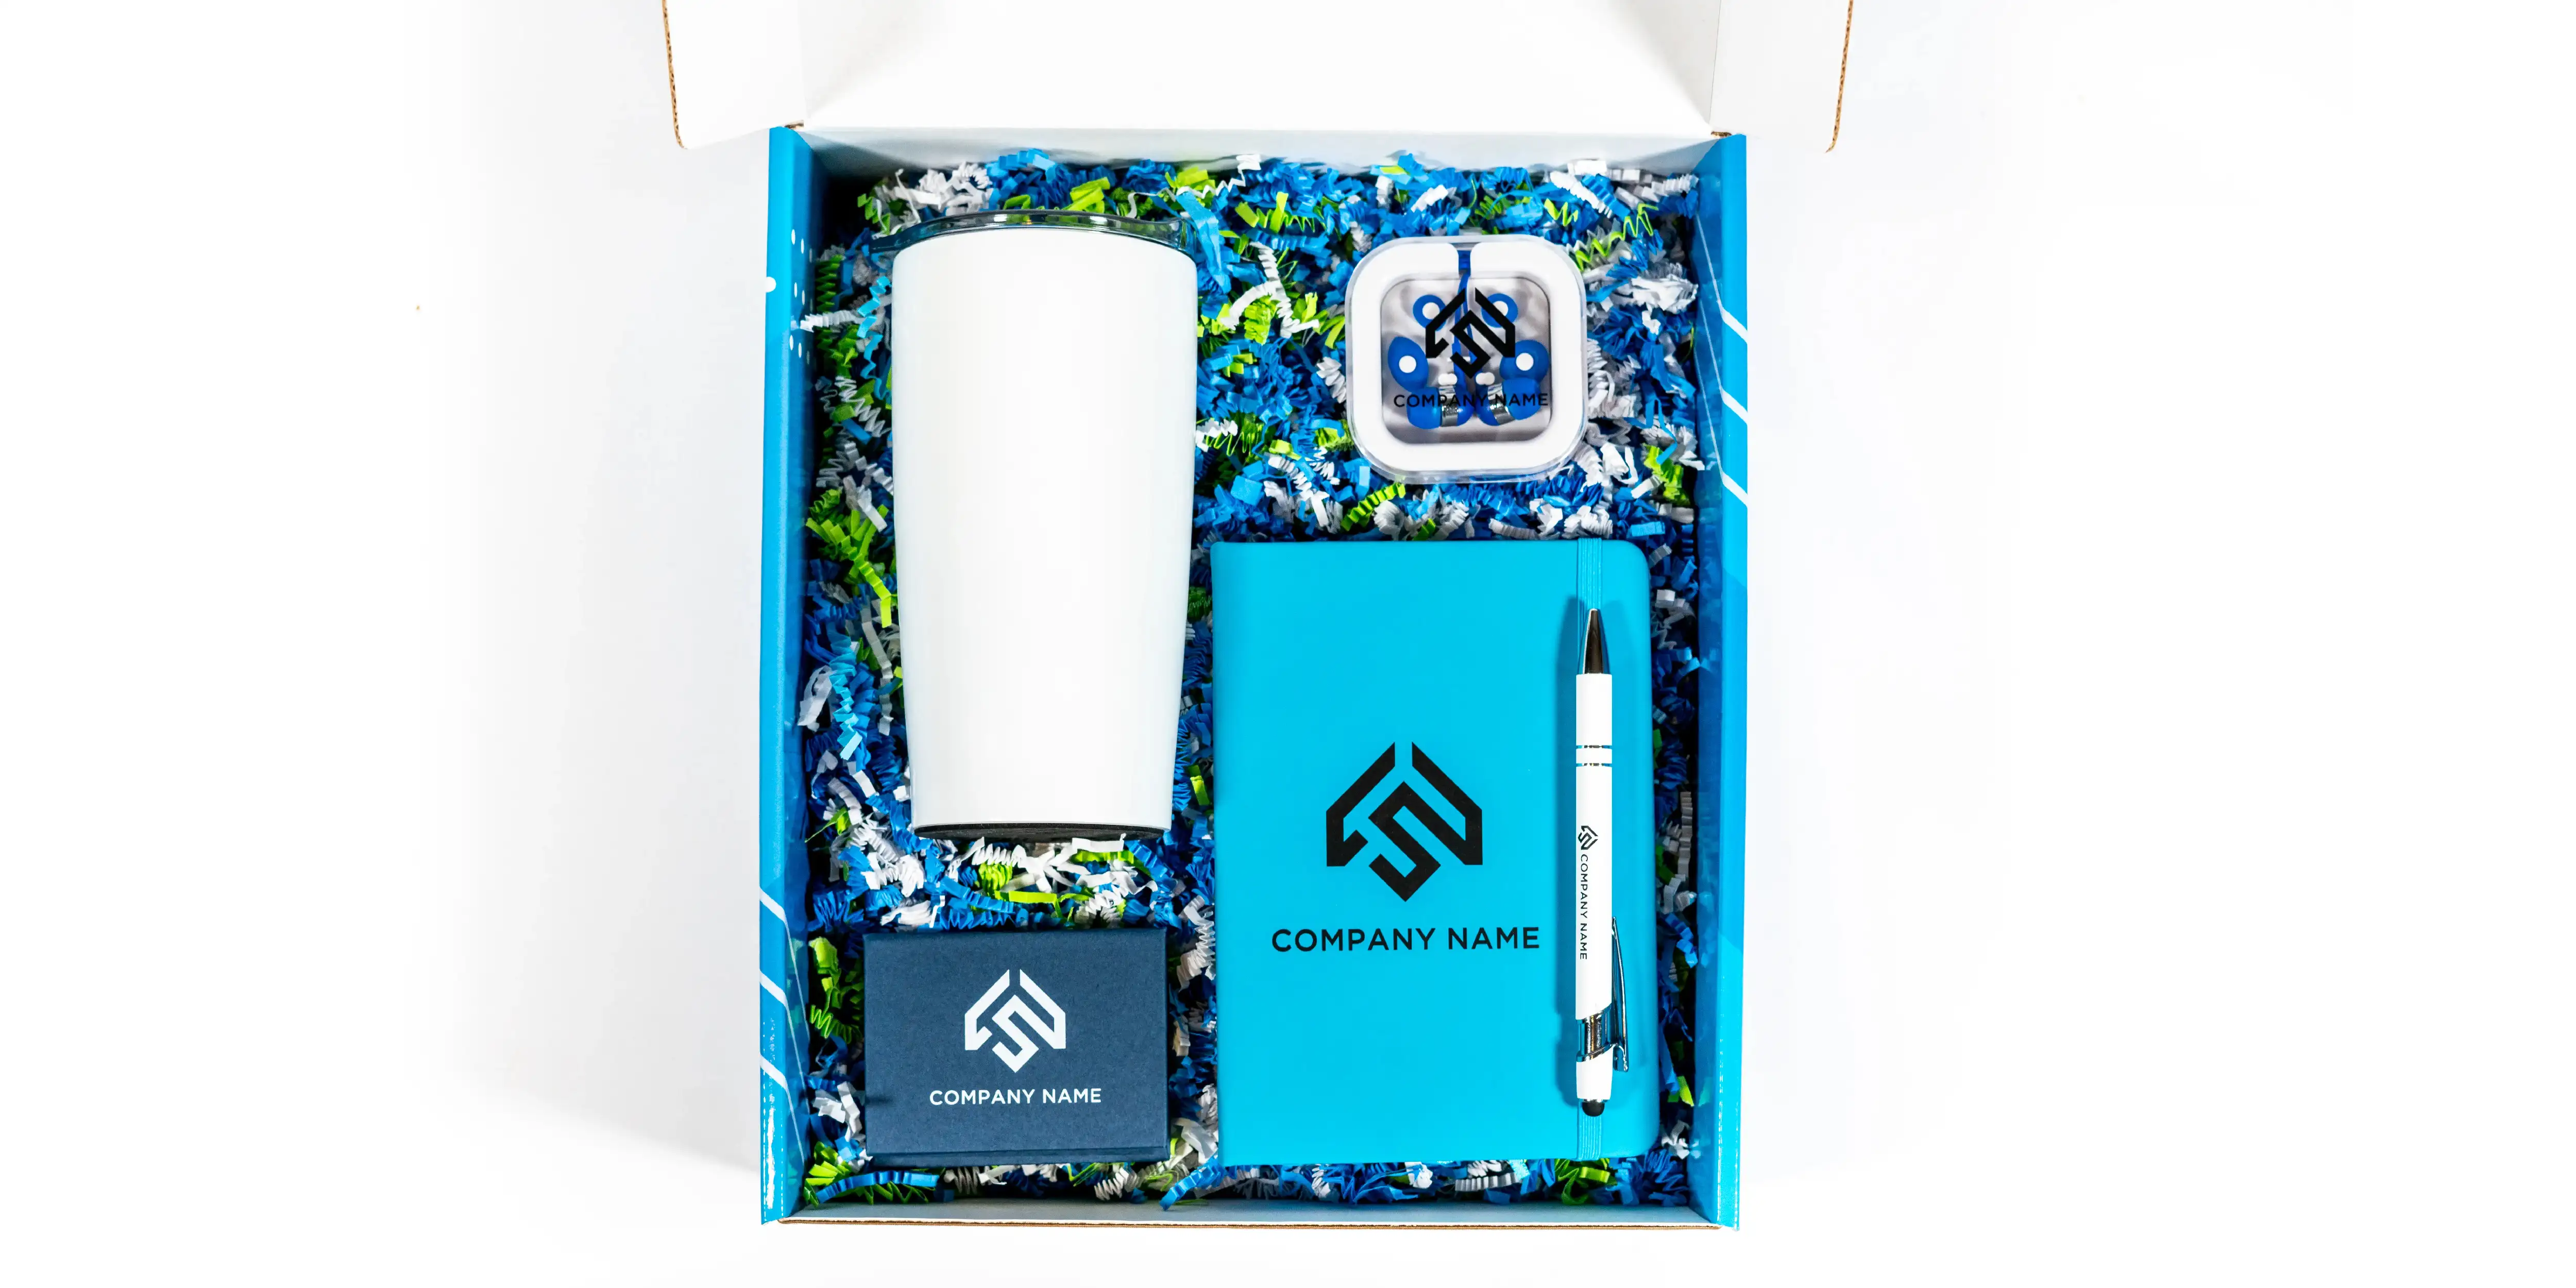 Branded gift boxes 